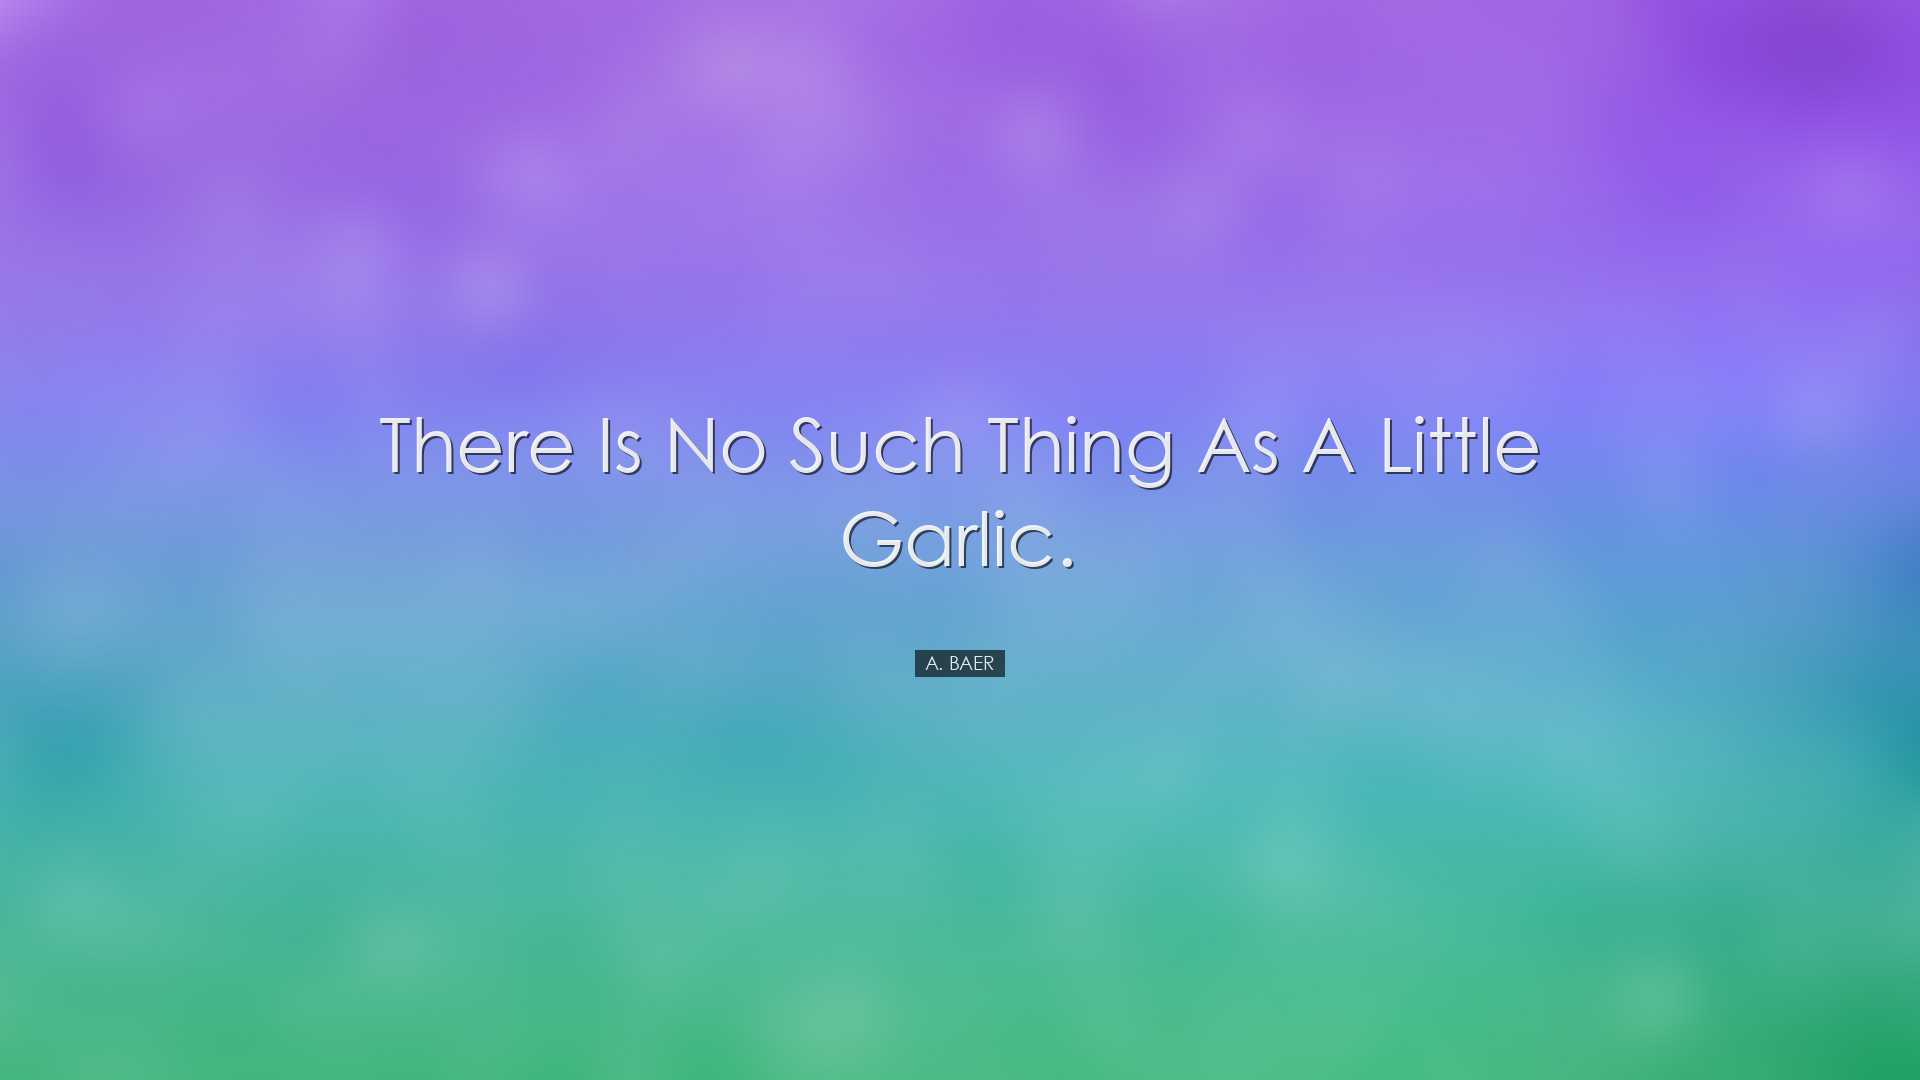 There is no such thing as a little garlic. - A. Baer